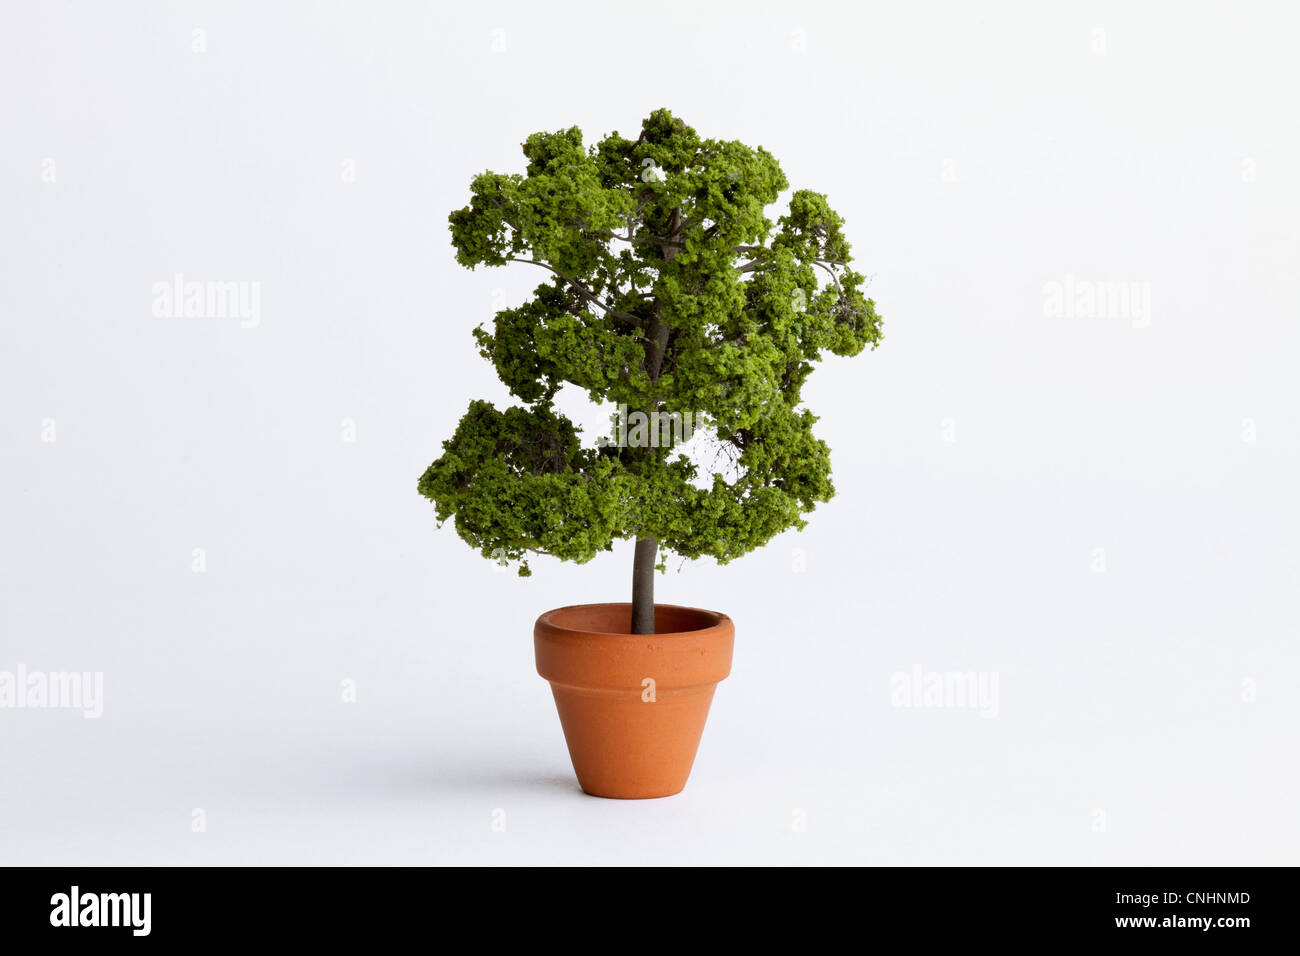 A miniature potted plant Stock Photo